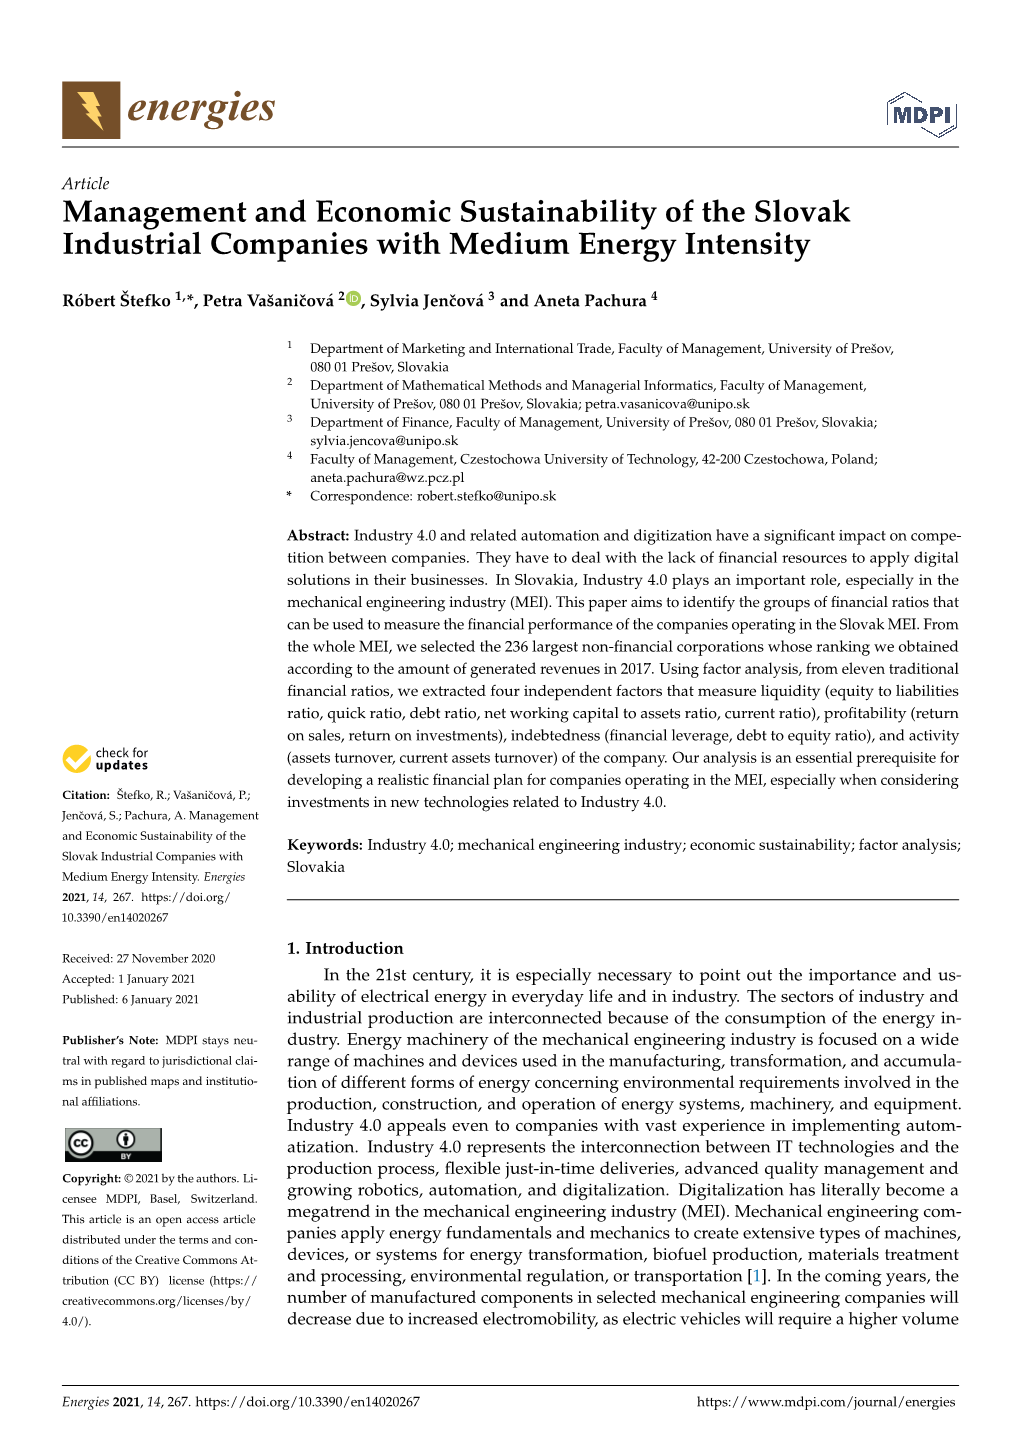 Management and Economic Sustainability of the Slovak Industrial Companies with Medium Energy Intensity